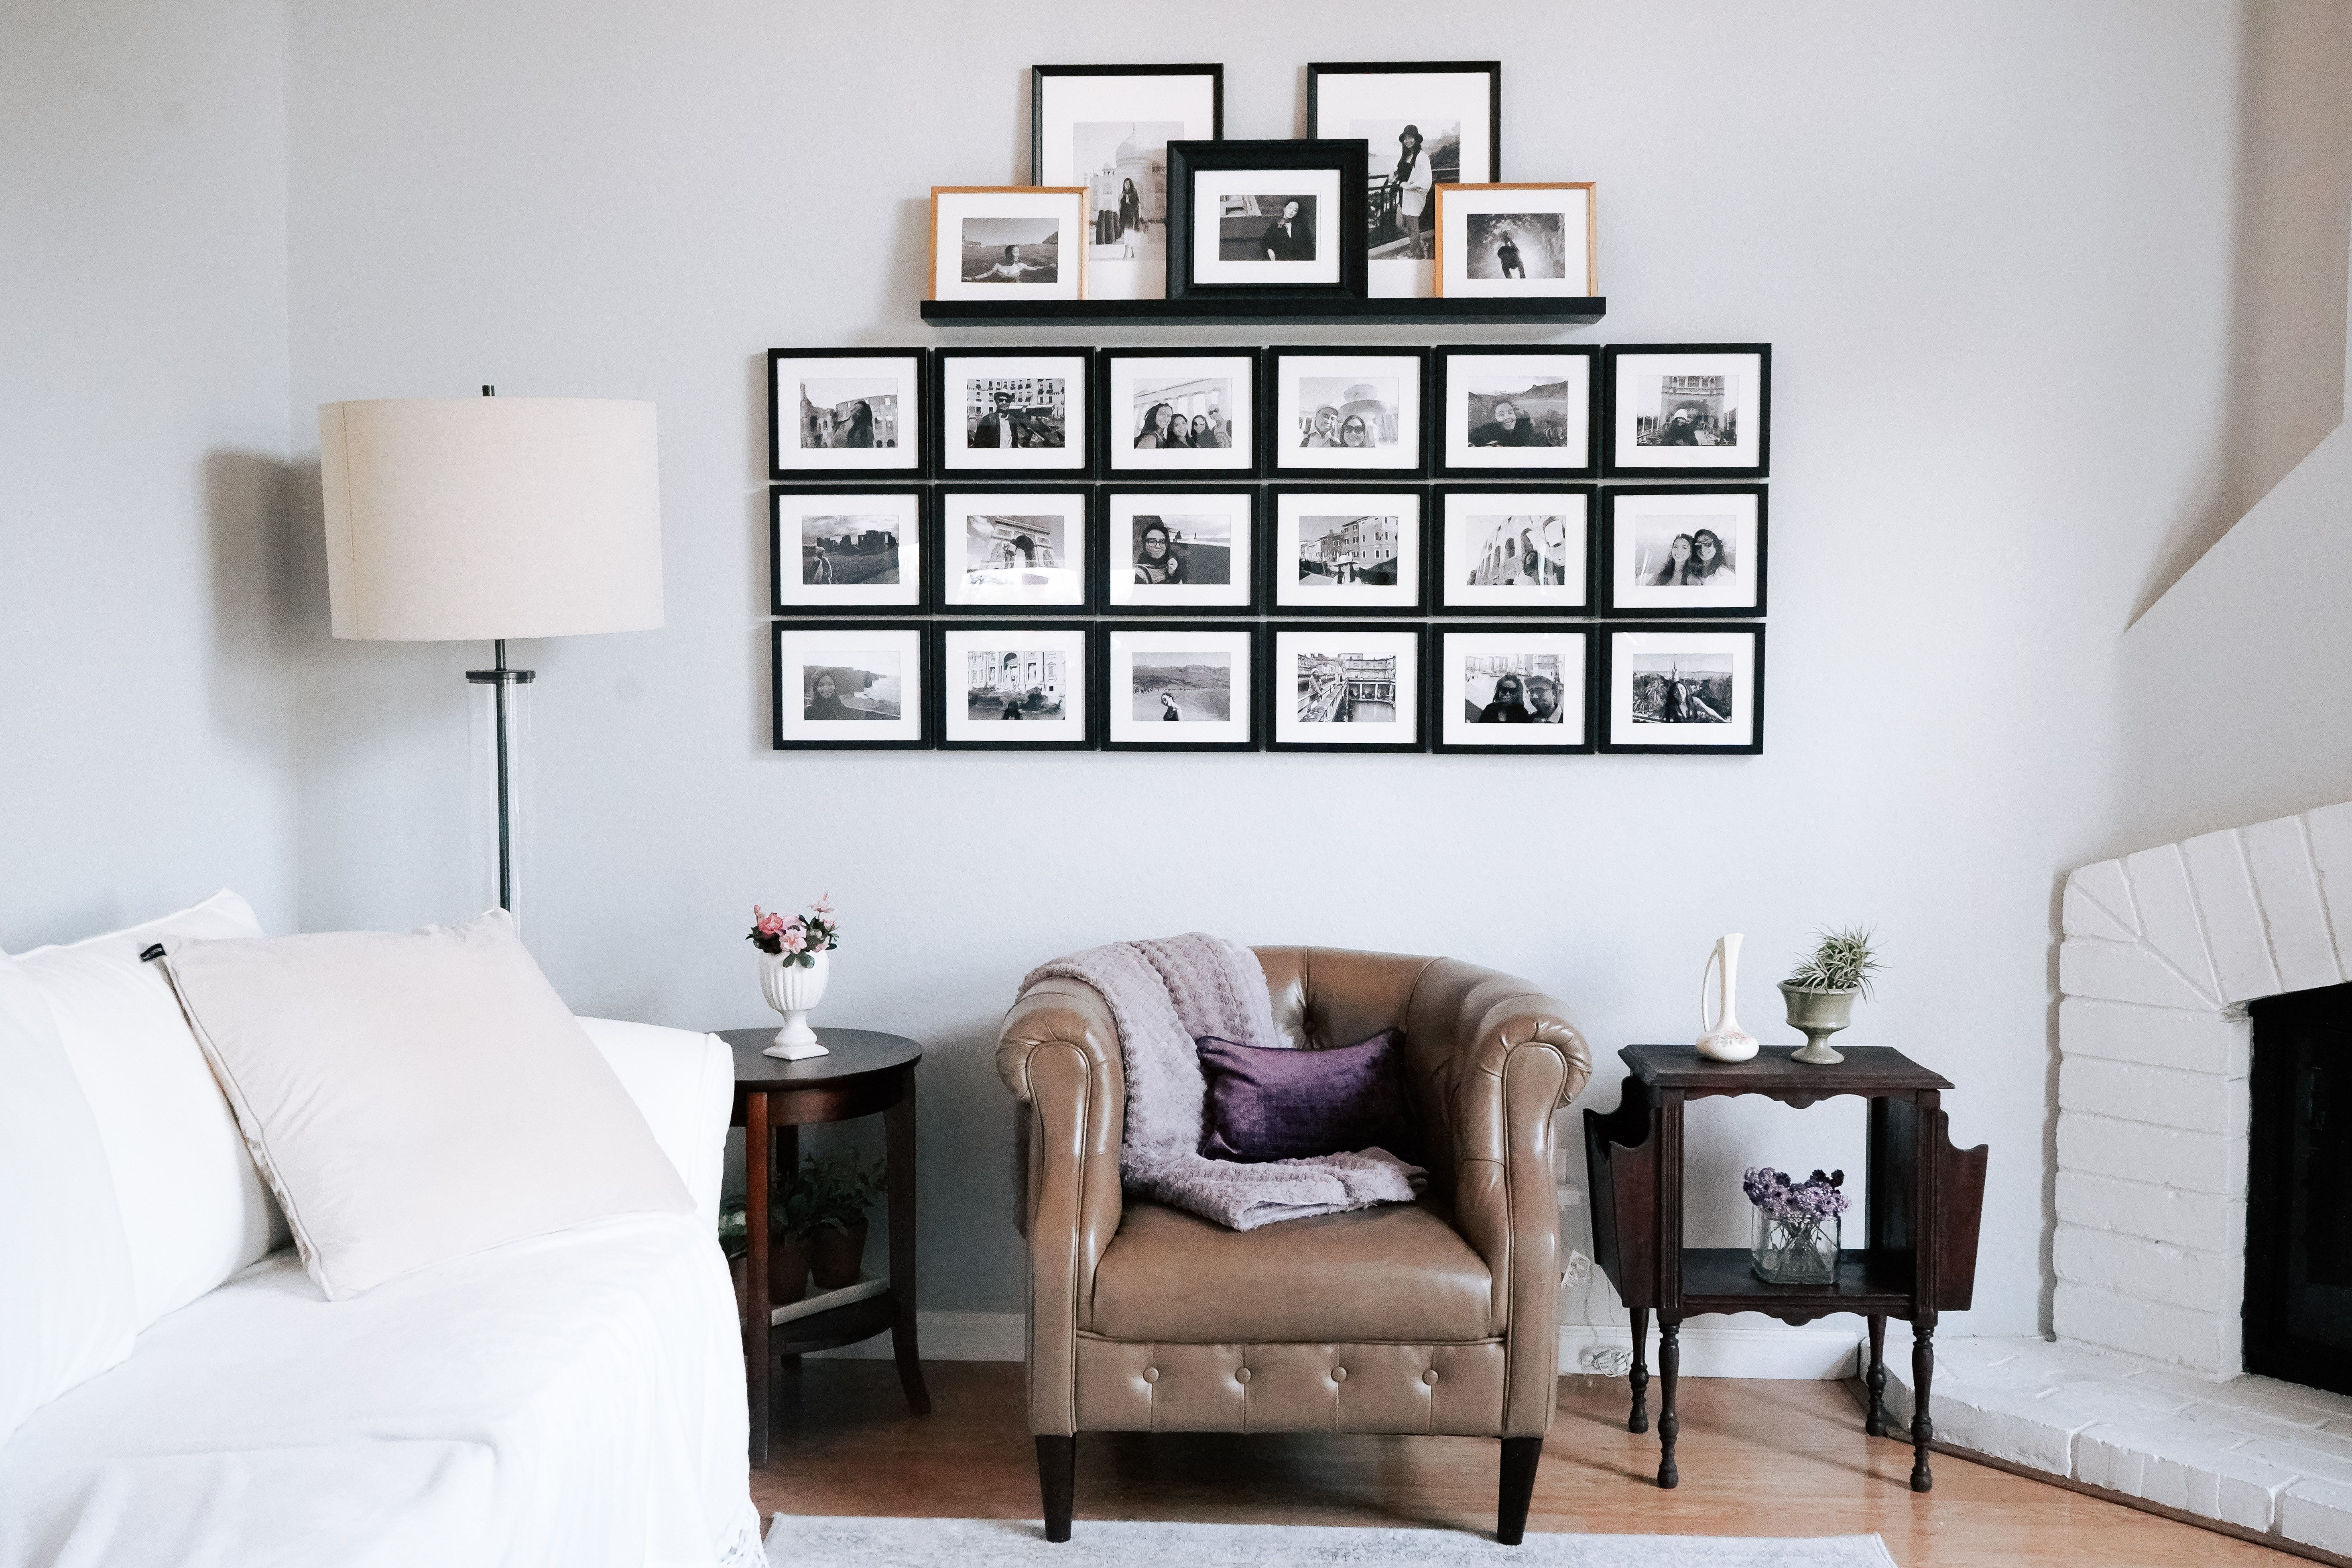 12 Quick Dos and Donts for Decorating With Artwork